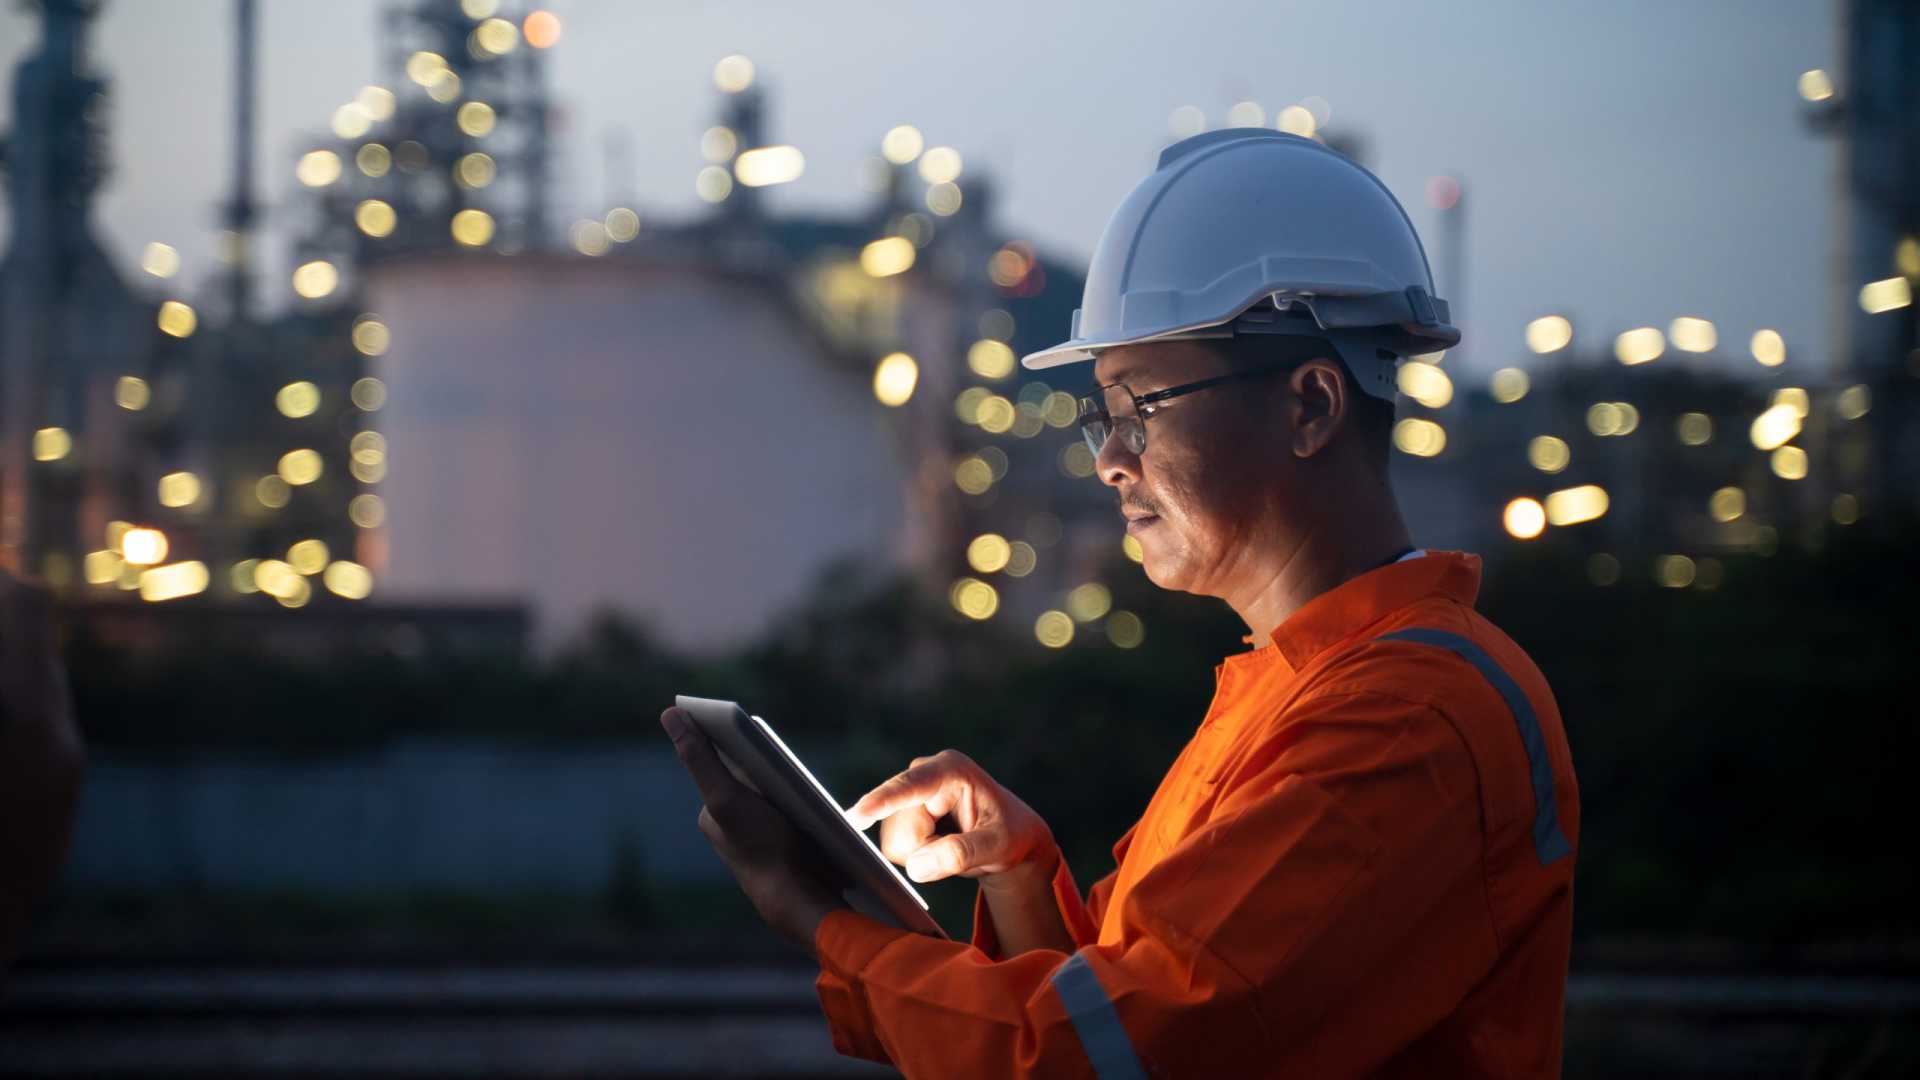 Artificial intelligence could transform oil and gas, but is the industry prepared?